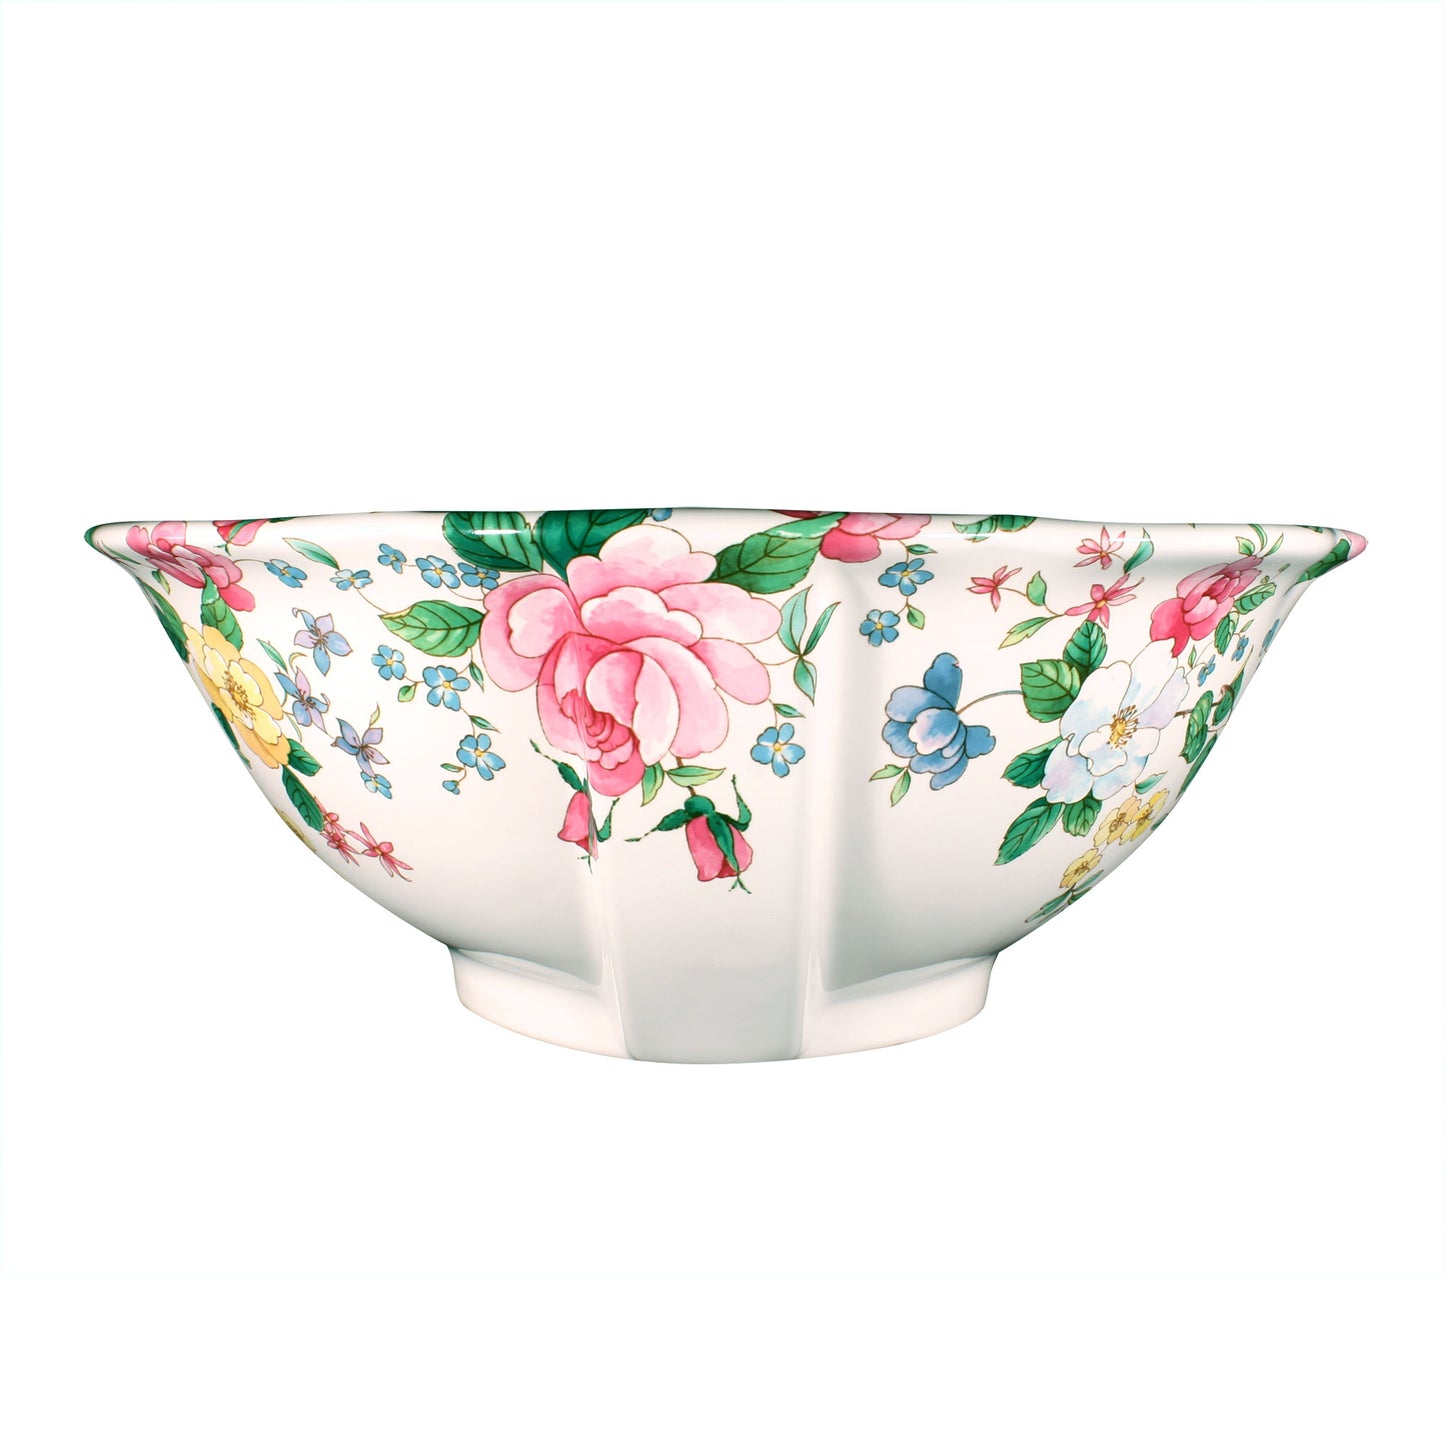 Back view of the Pink & White Chintz Roses painted flower vessel sink.